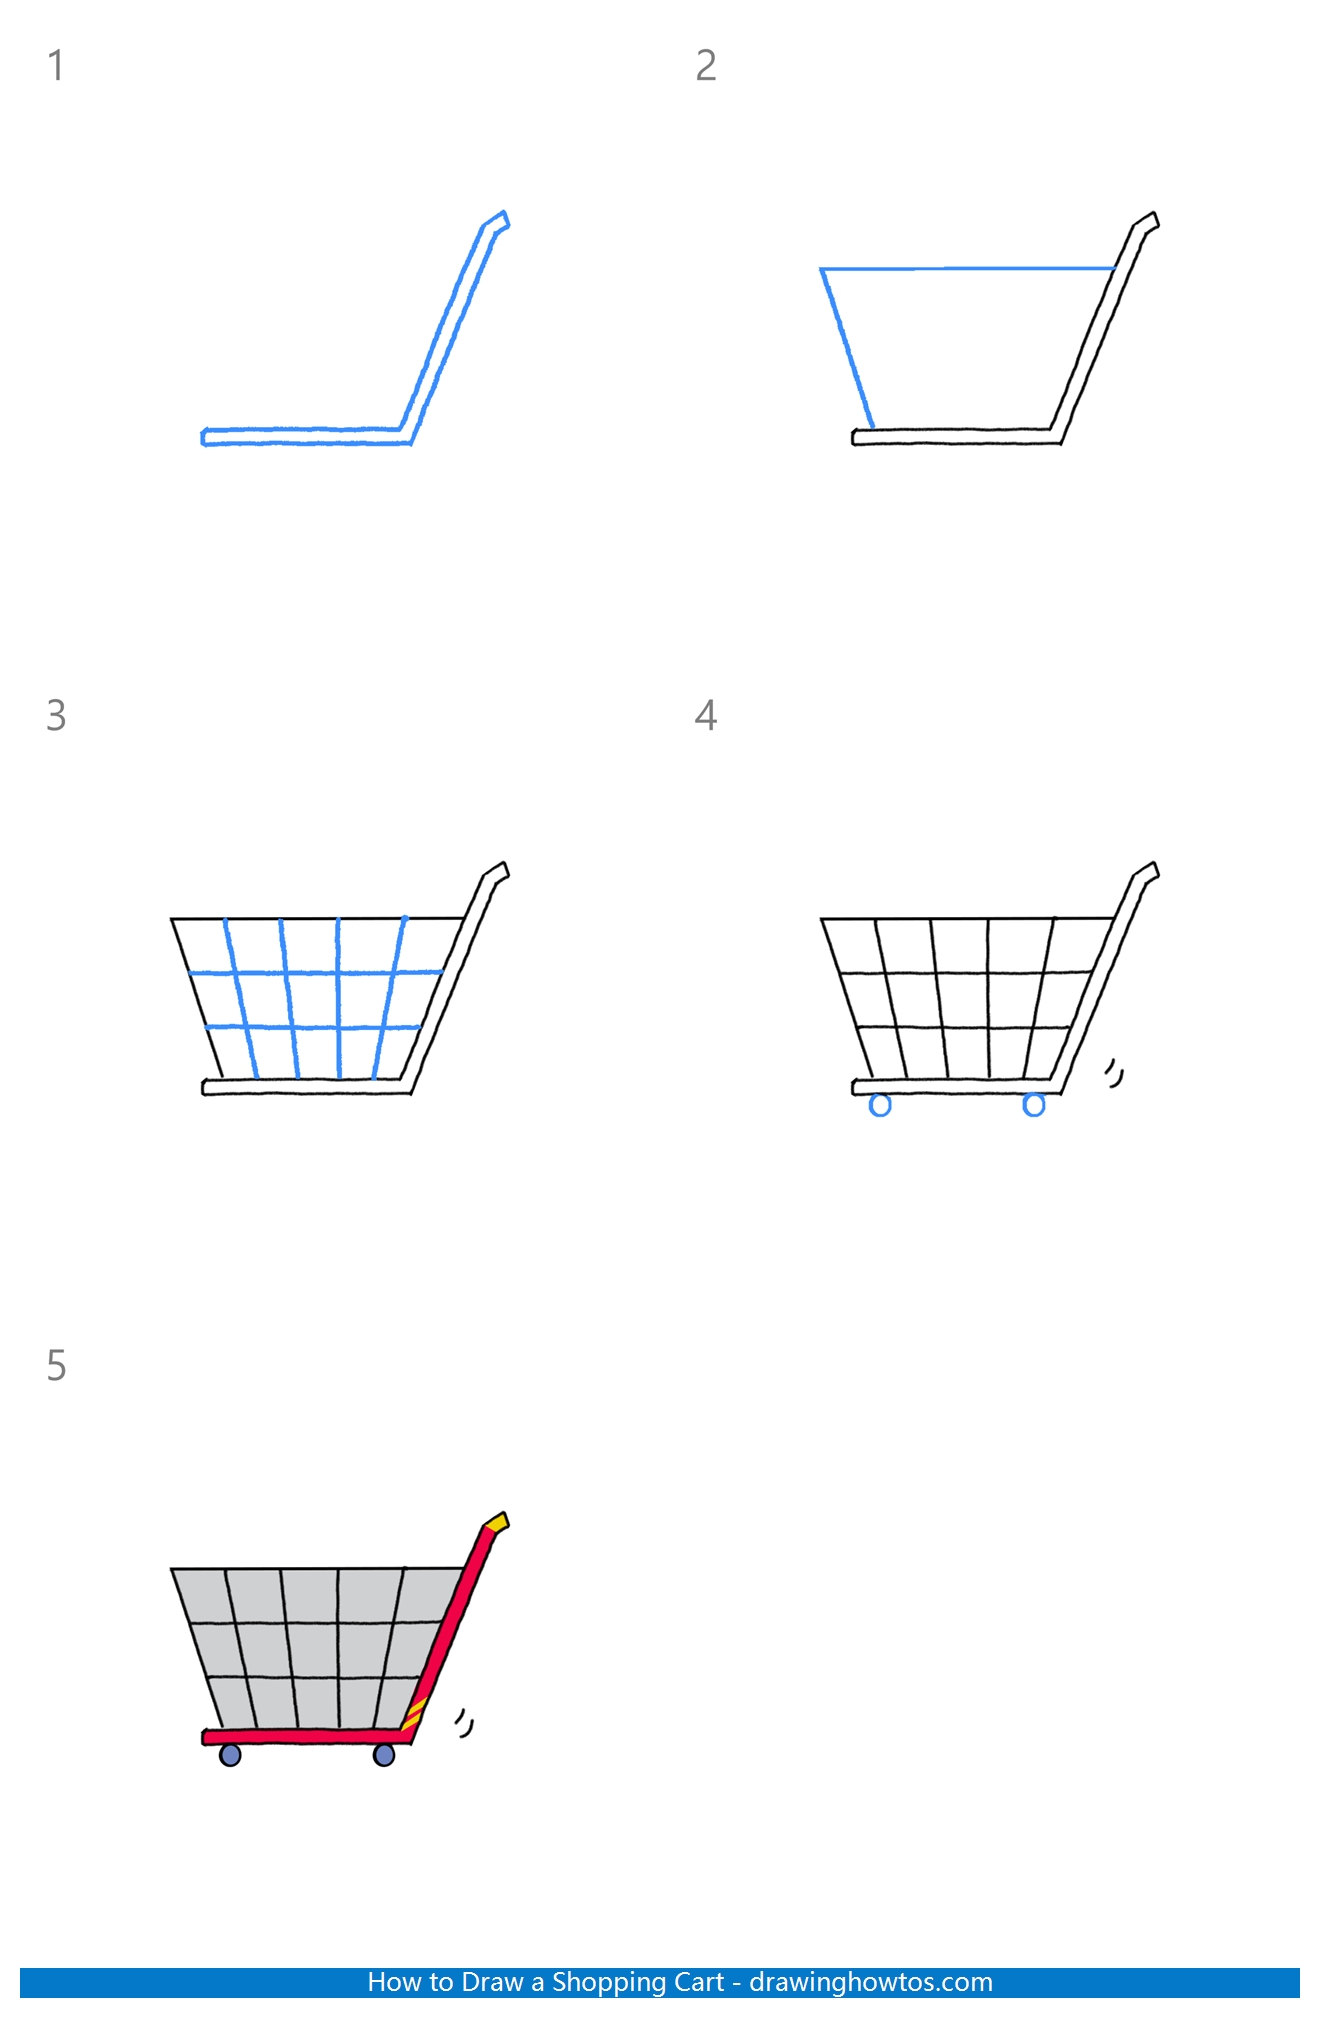 How to Draw a Shopping Cart Step by Step